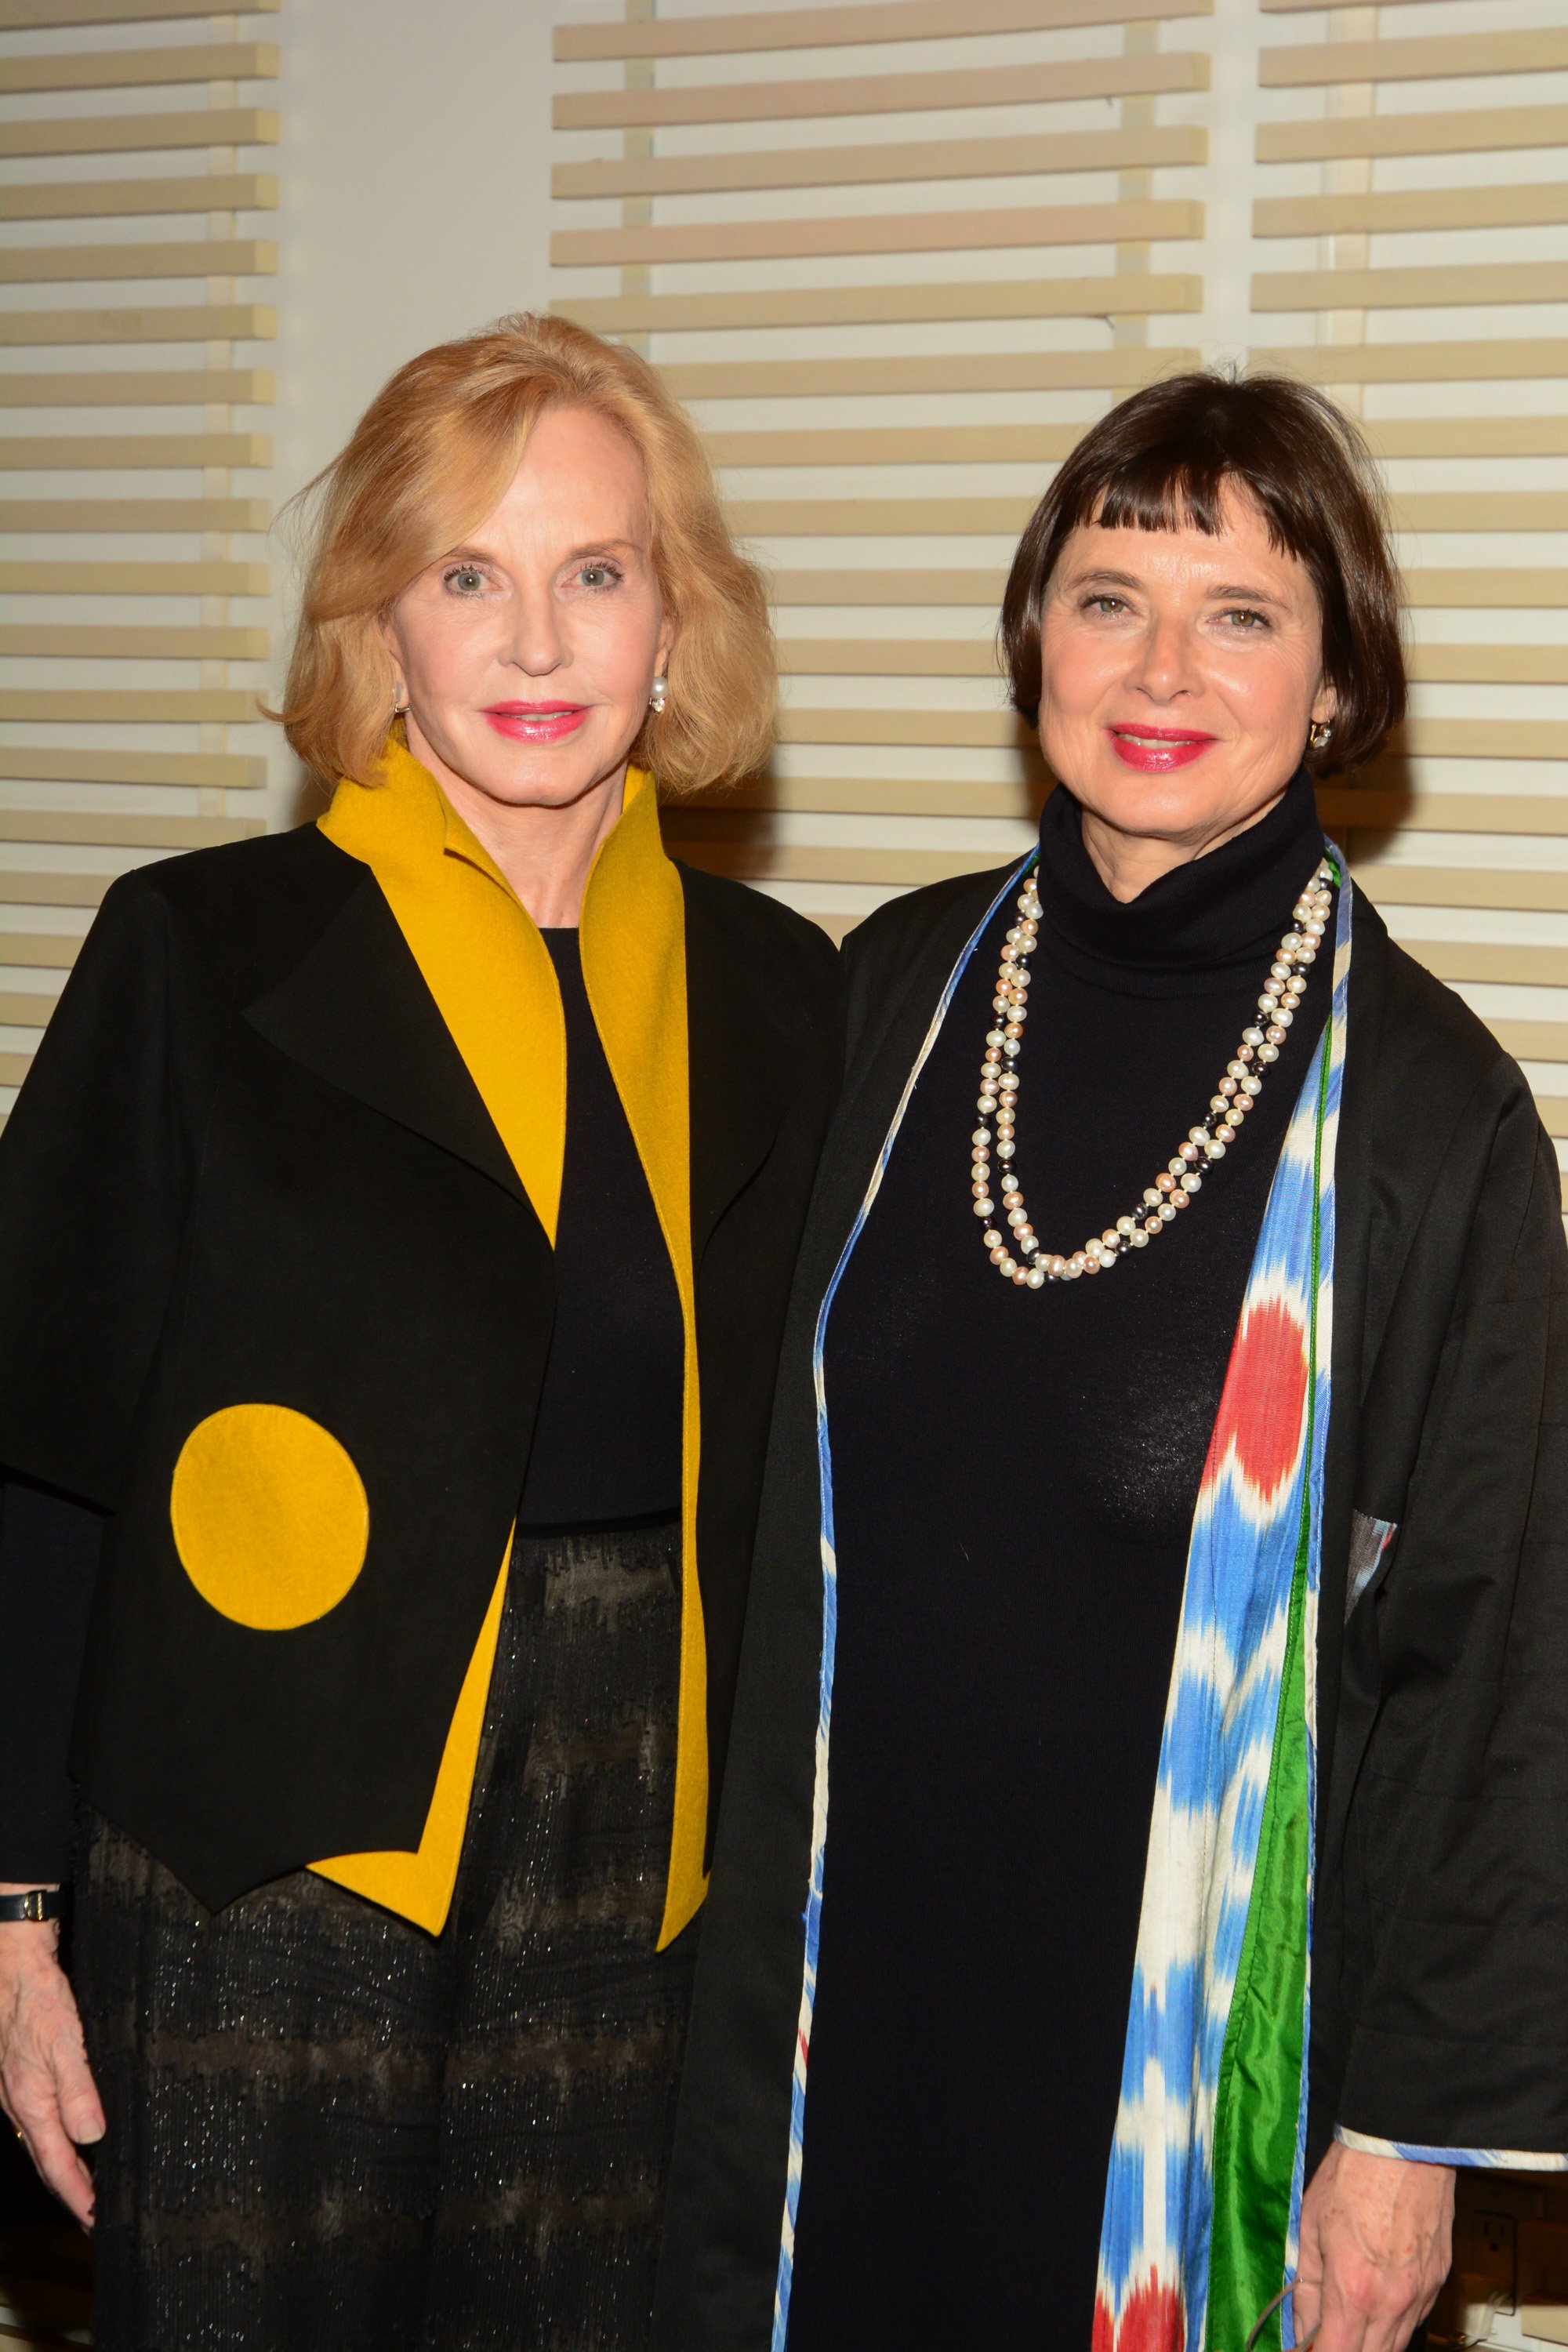 Pia Lindström and Isabella Rossellini at the screening of "Ingrid Bergman: In Her Own Words" on November 10, 2015, in New York | Source: Getty Images